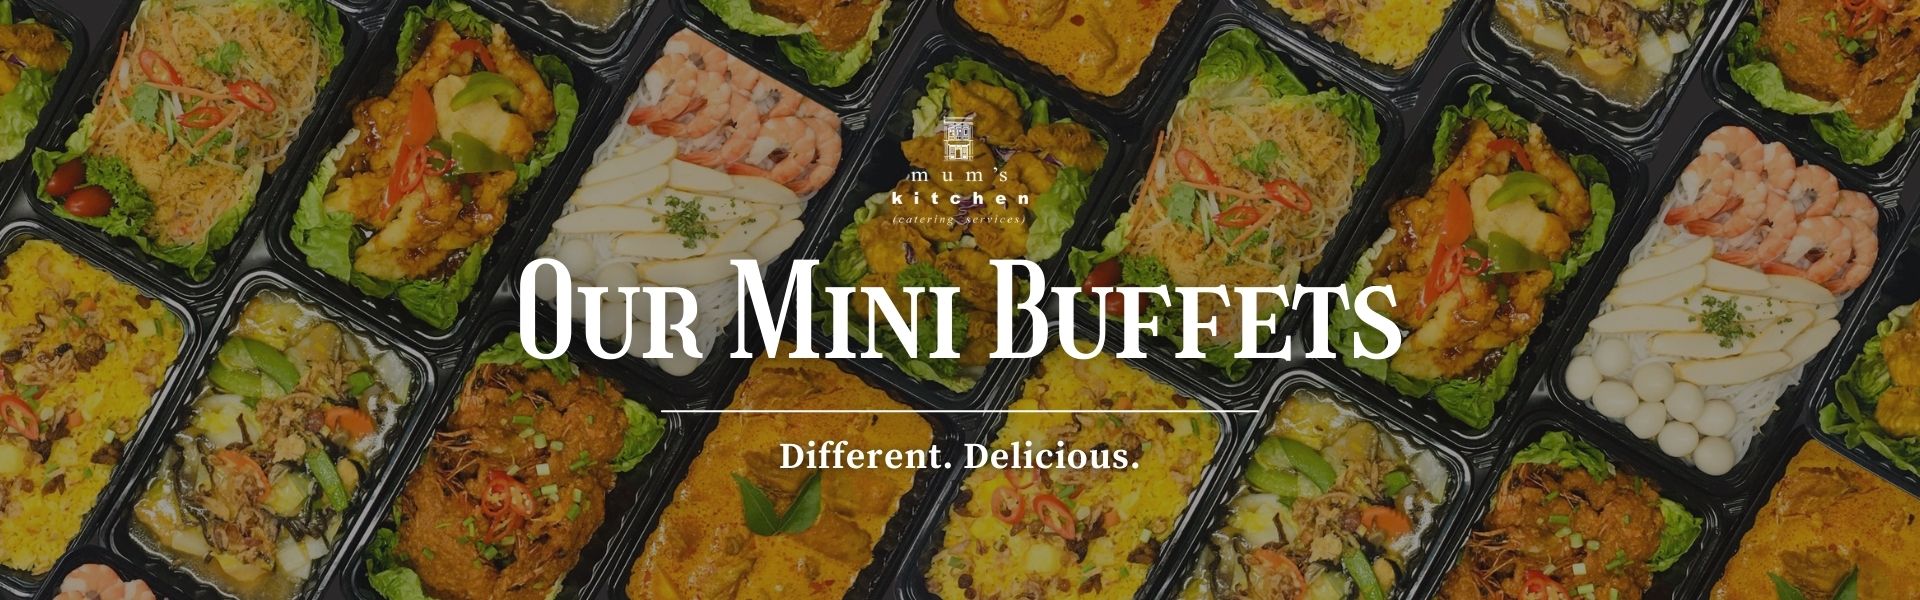 Halal Singapore Catering Service | Buffet Catering | Mum's Kitchen Catering